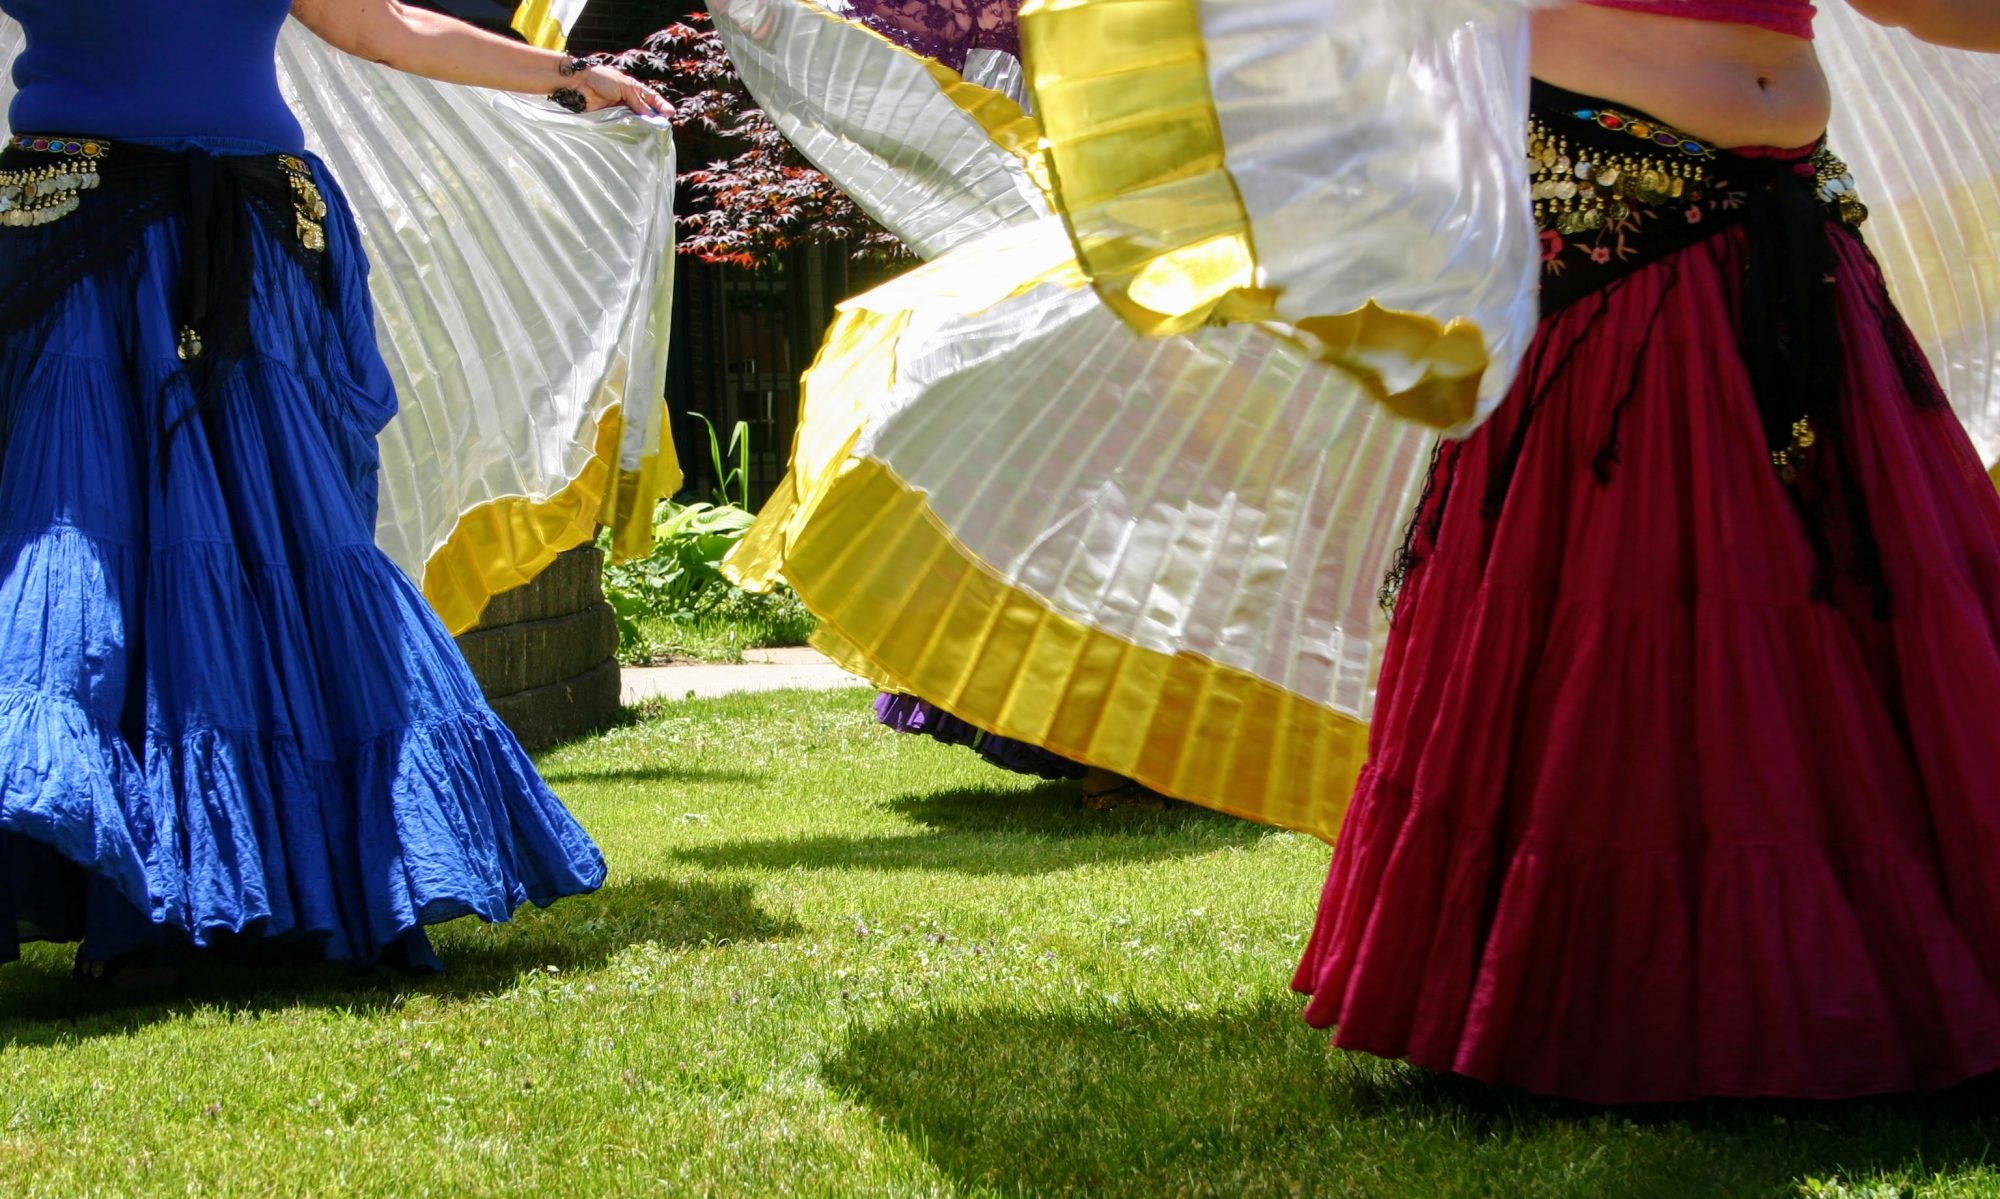 Dancers wearing brightly coloured skirts in the sunshine